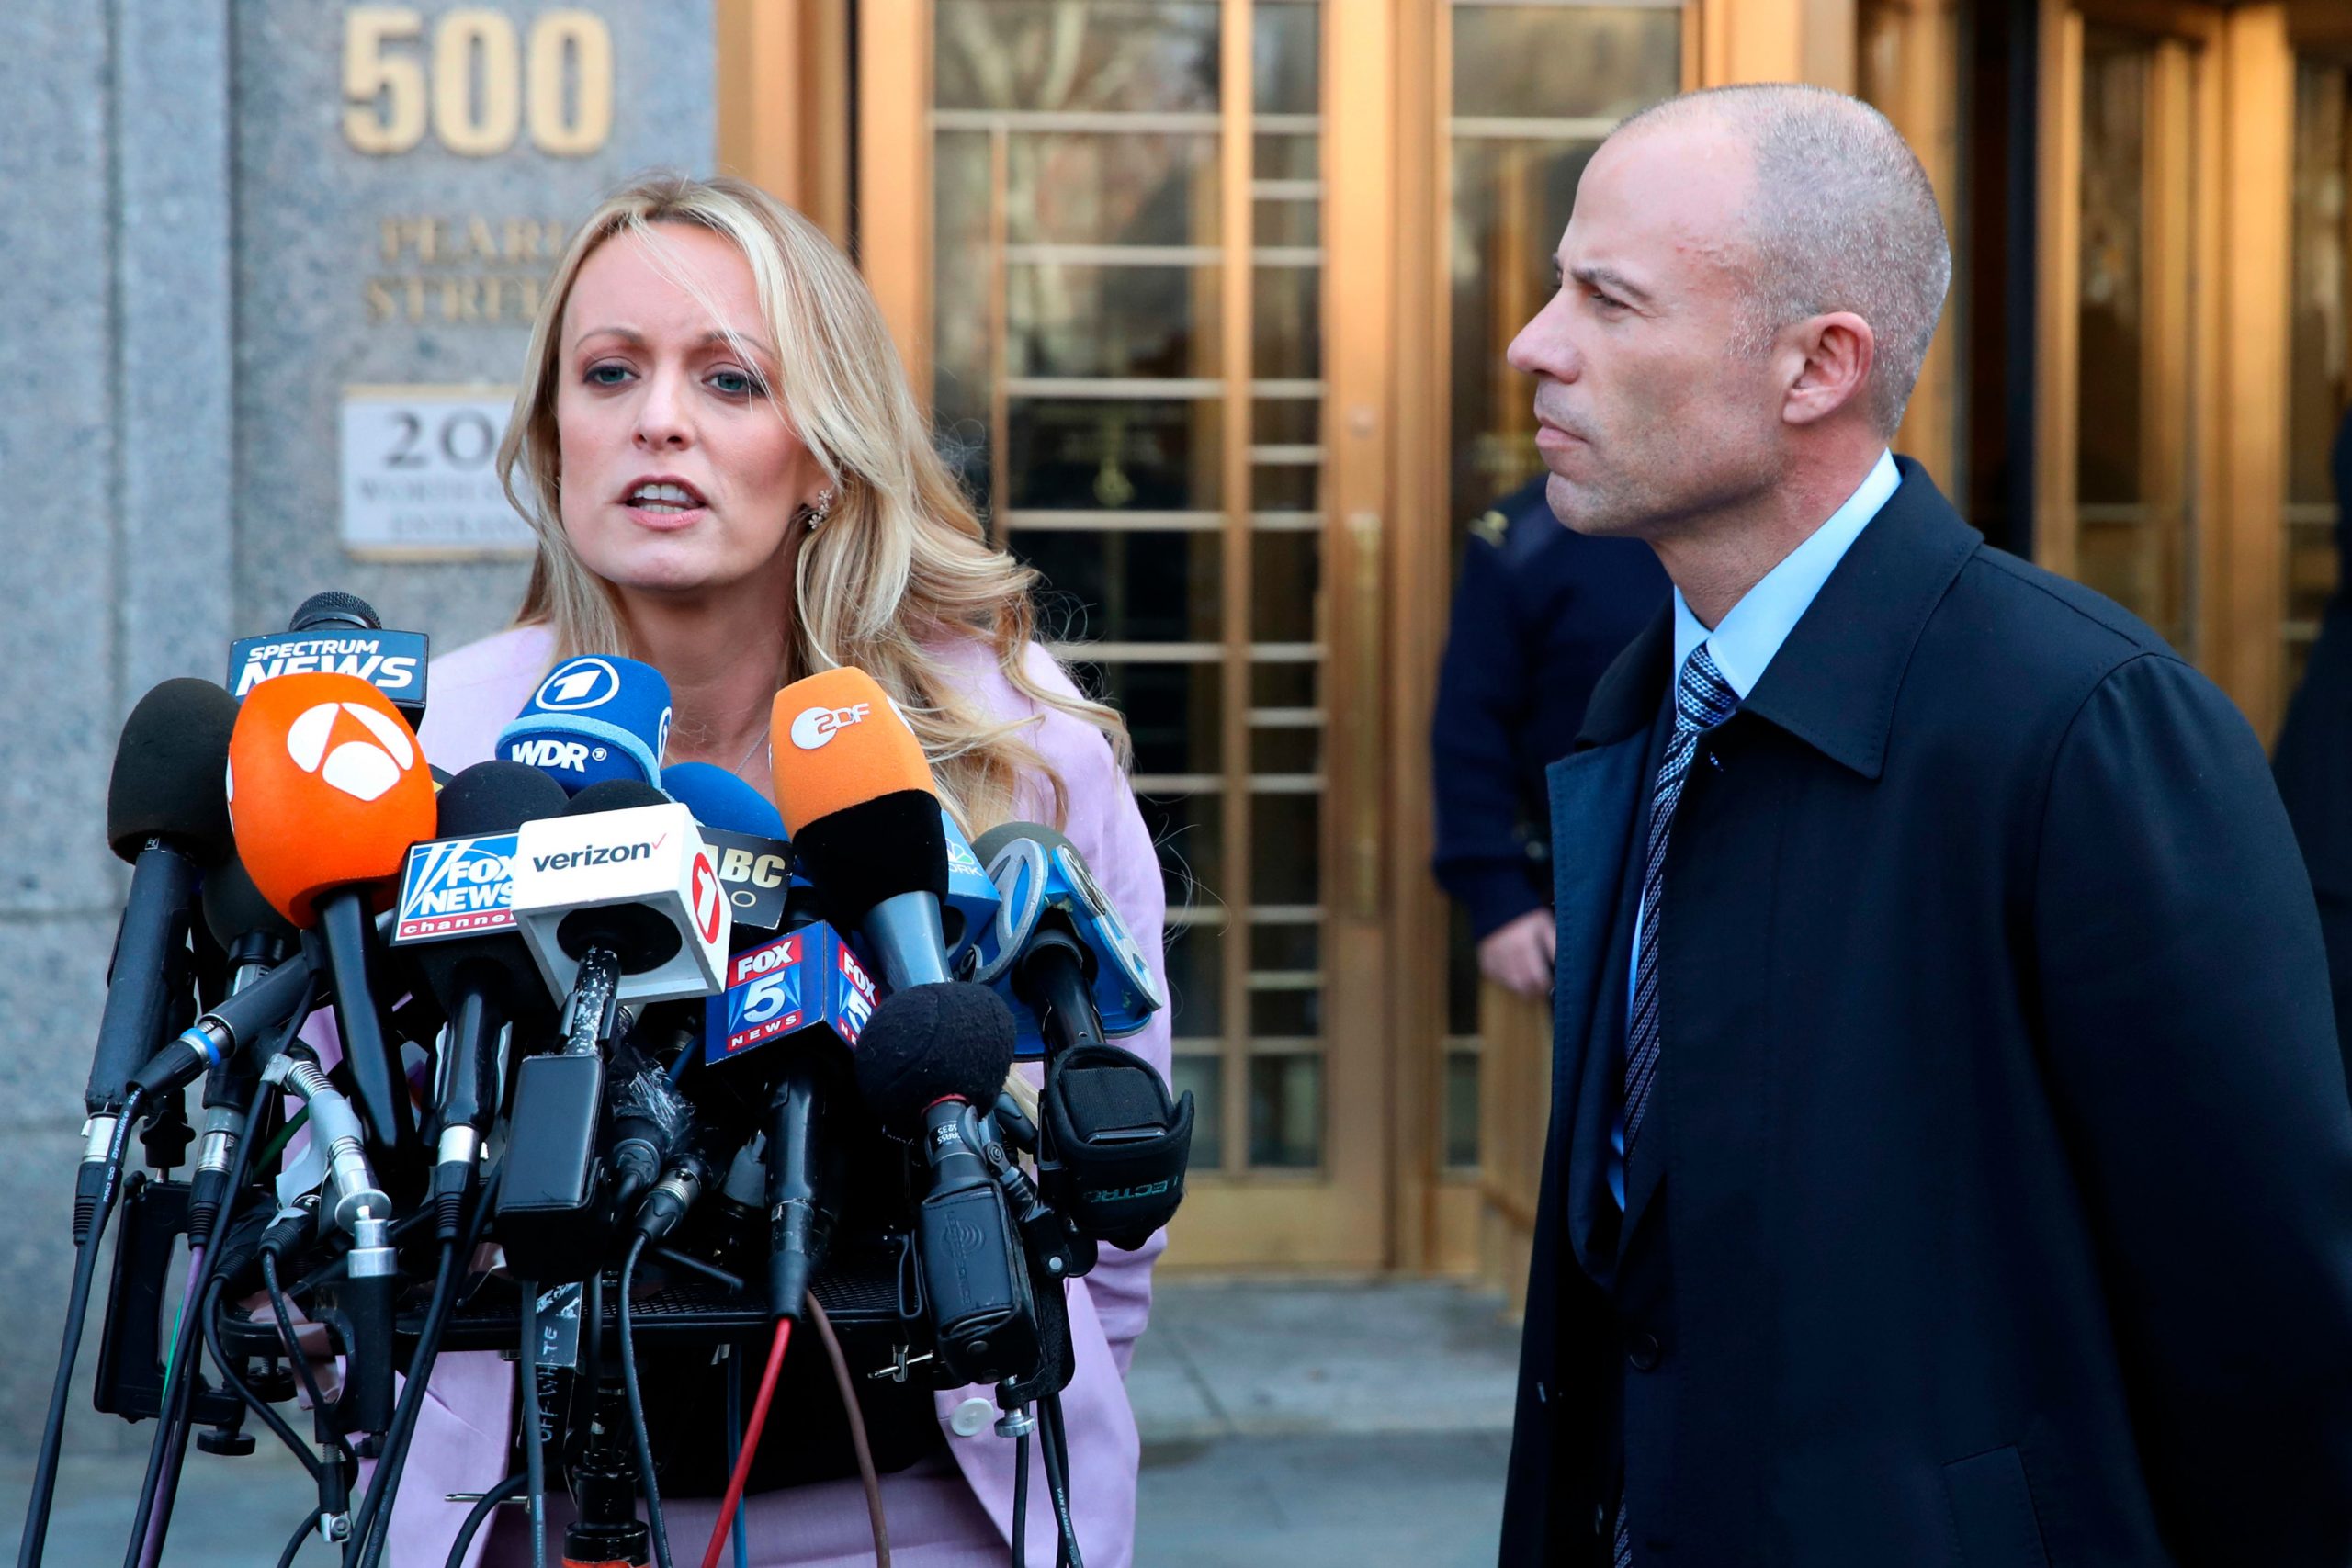 Allies to enemies: Stormy Daniels and Michael Avenatti face off at trial